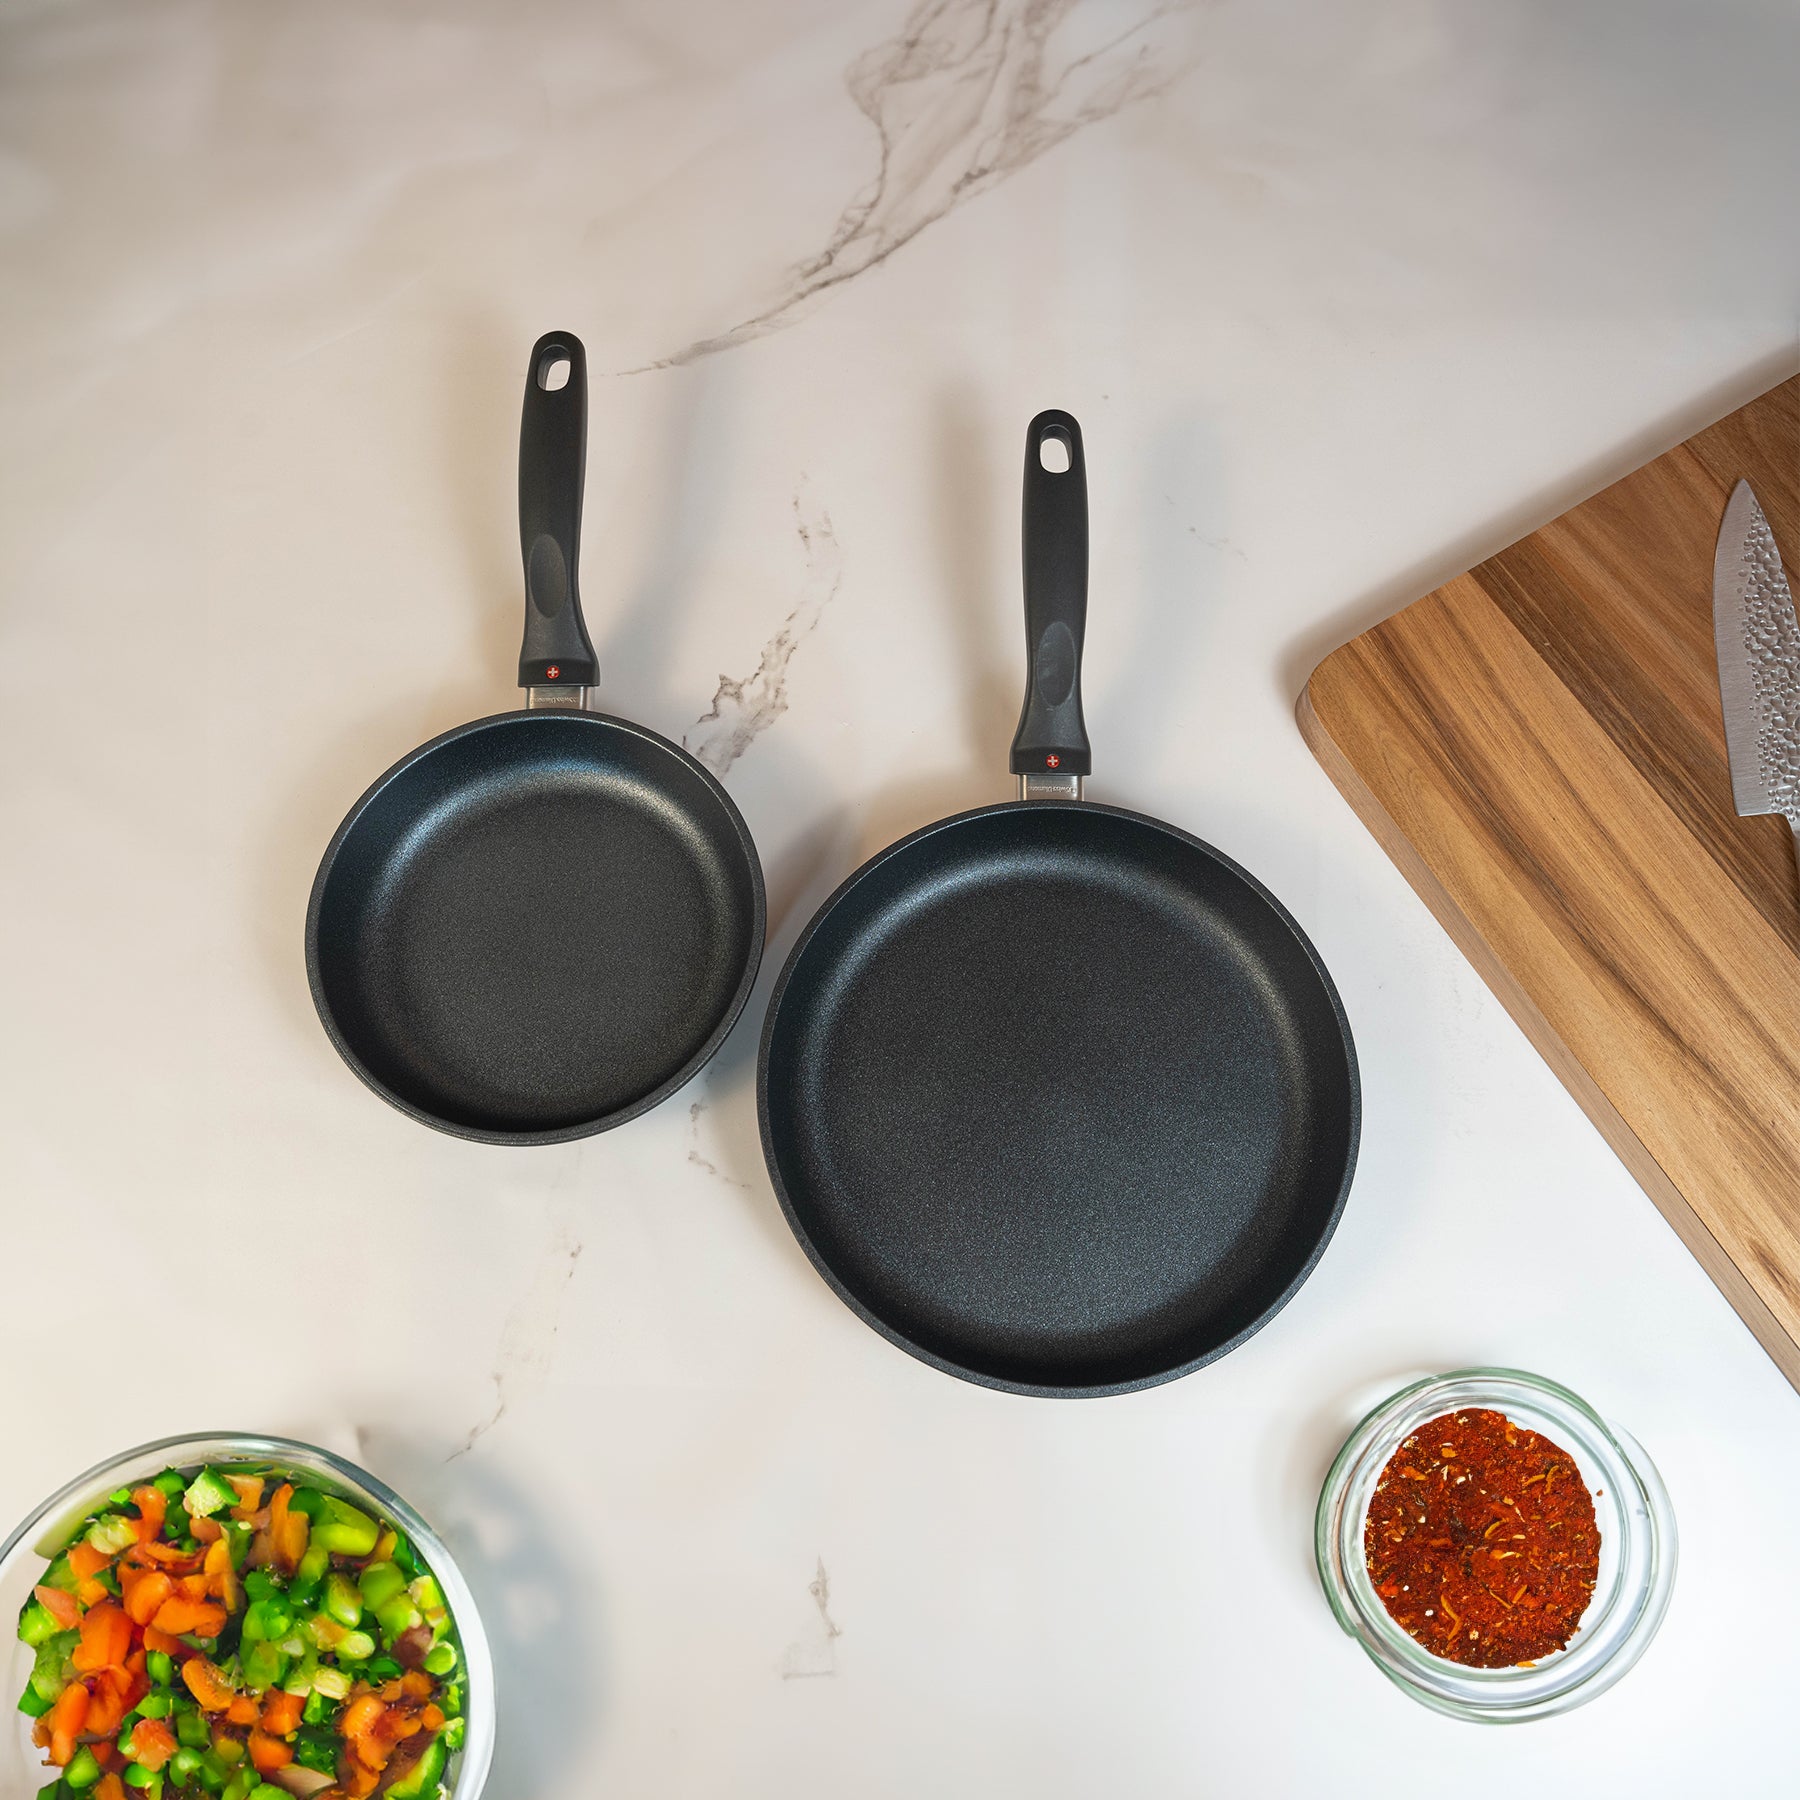 XD Nonstick 2-Piece Fry Pan Set - Induction in use on kitchen counter top view